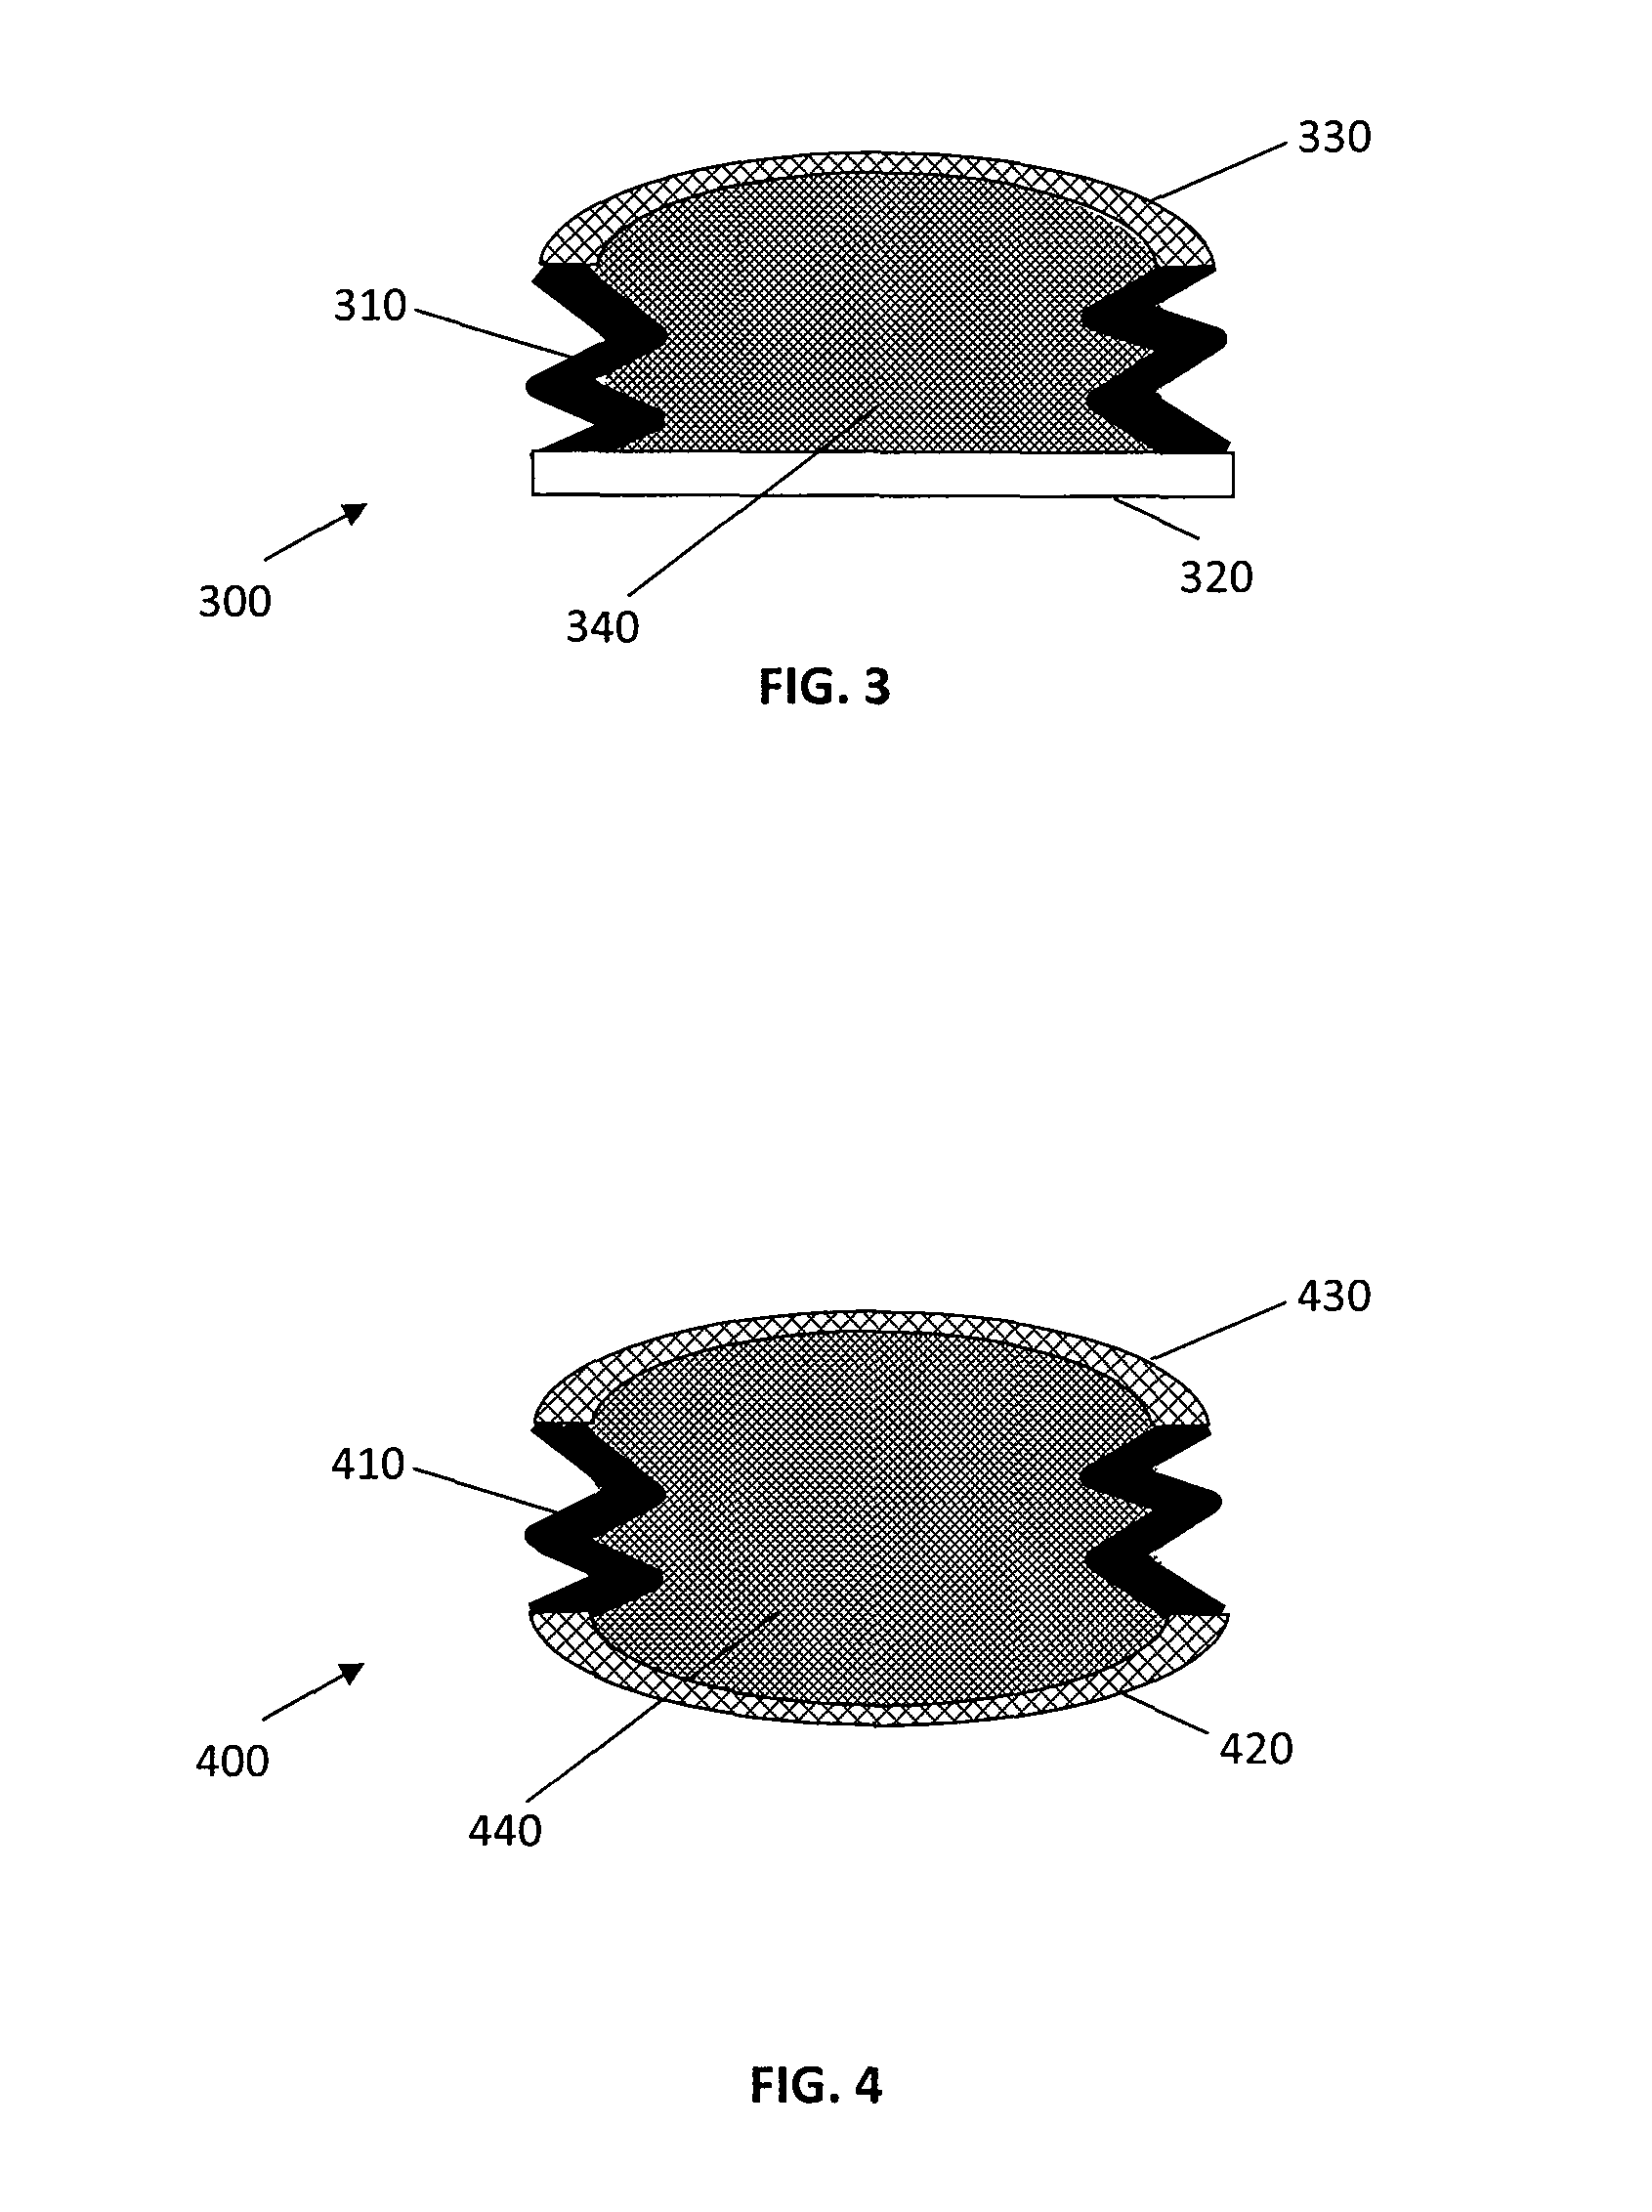 Fluidic adaptive lens with a lens membrane having suppressed fluid permeability